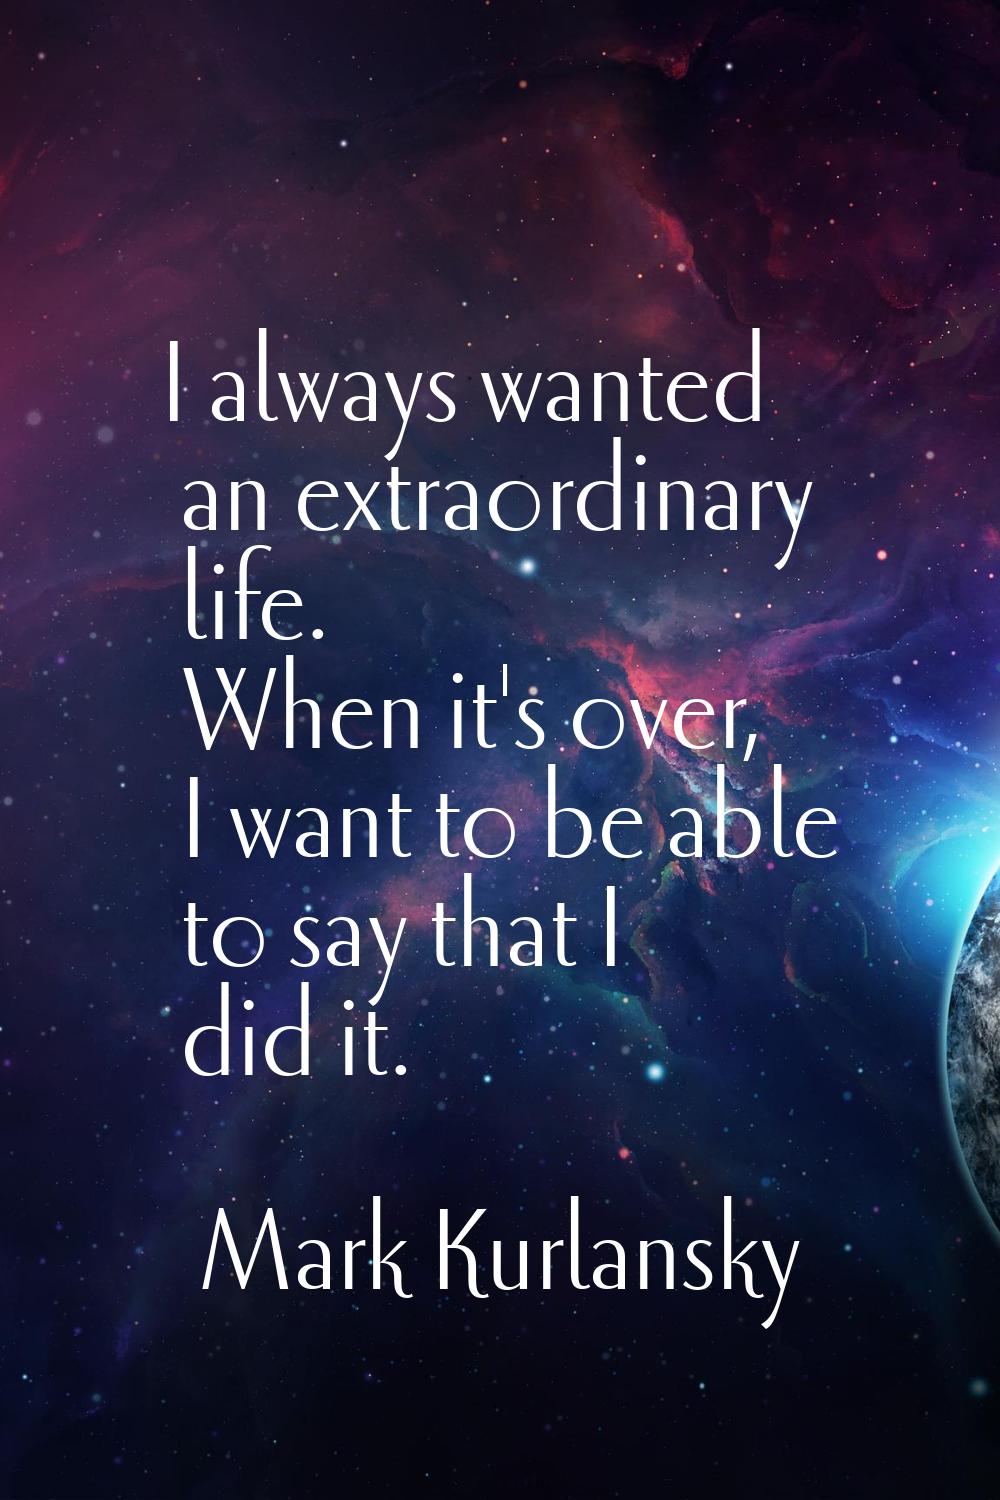 I always wanted an extraordinary life. When it's over, I want to be able to say that I did it.